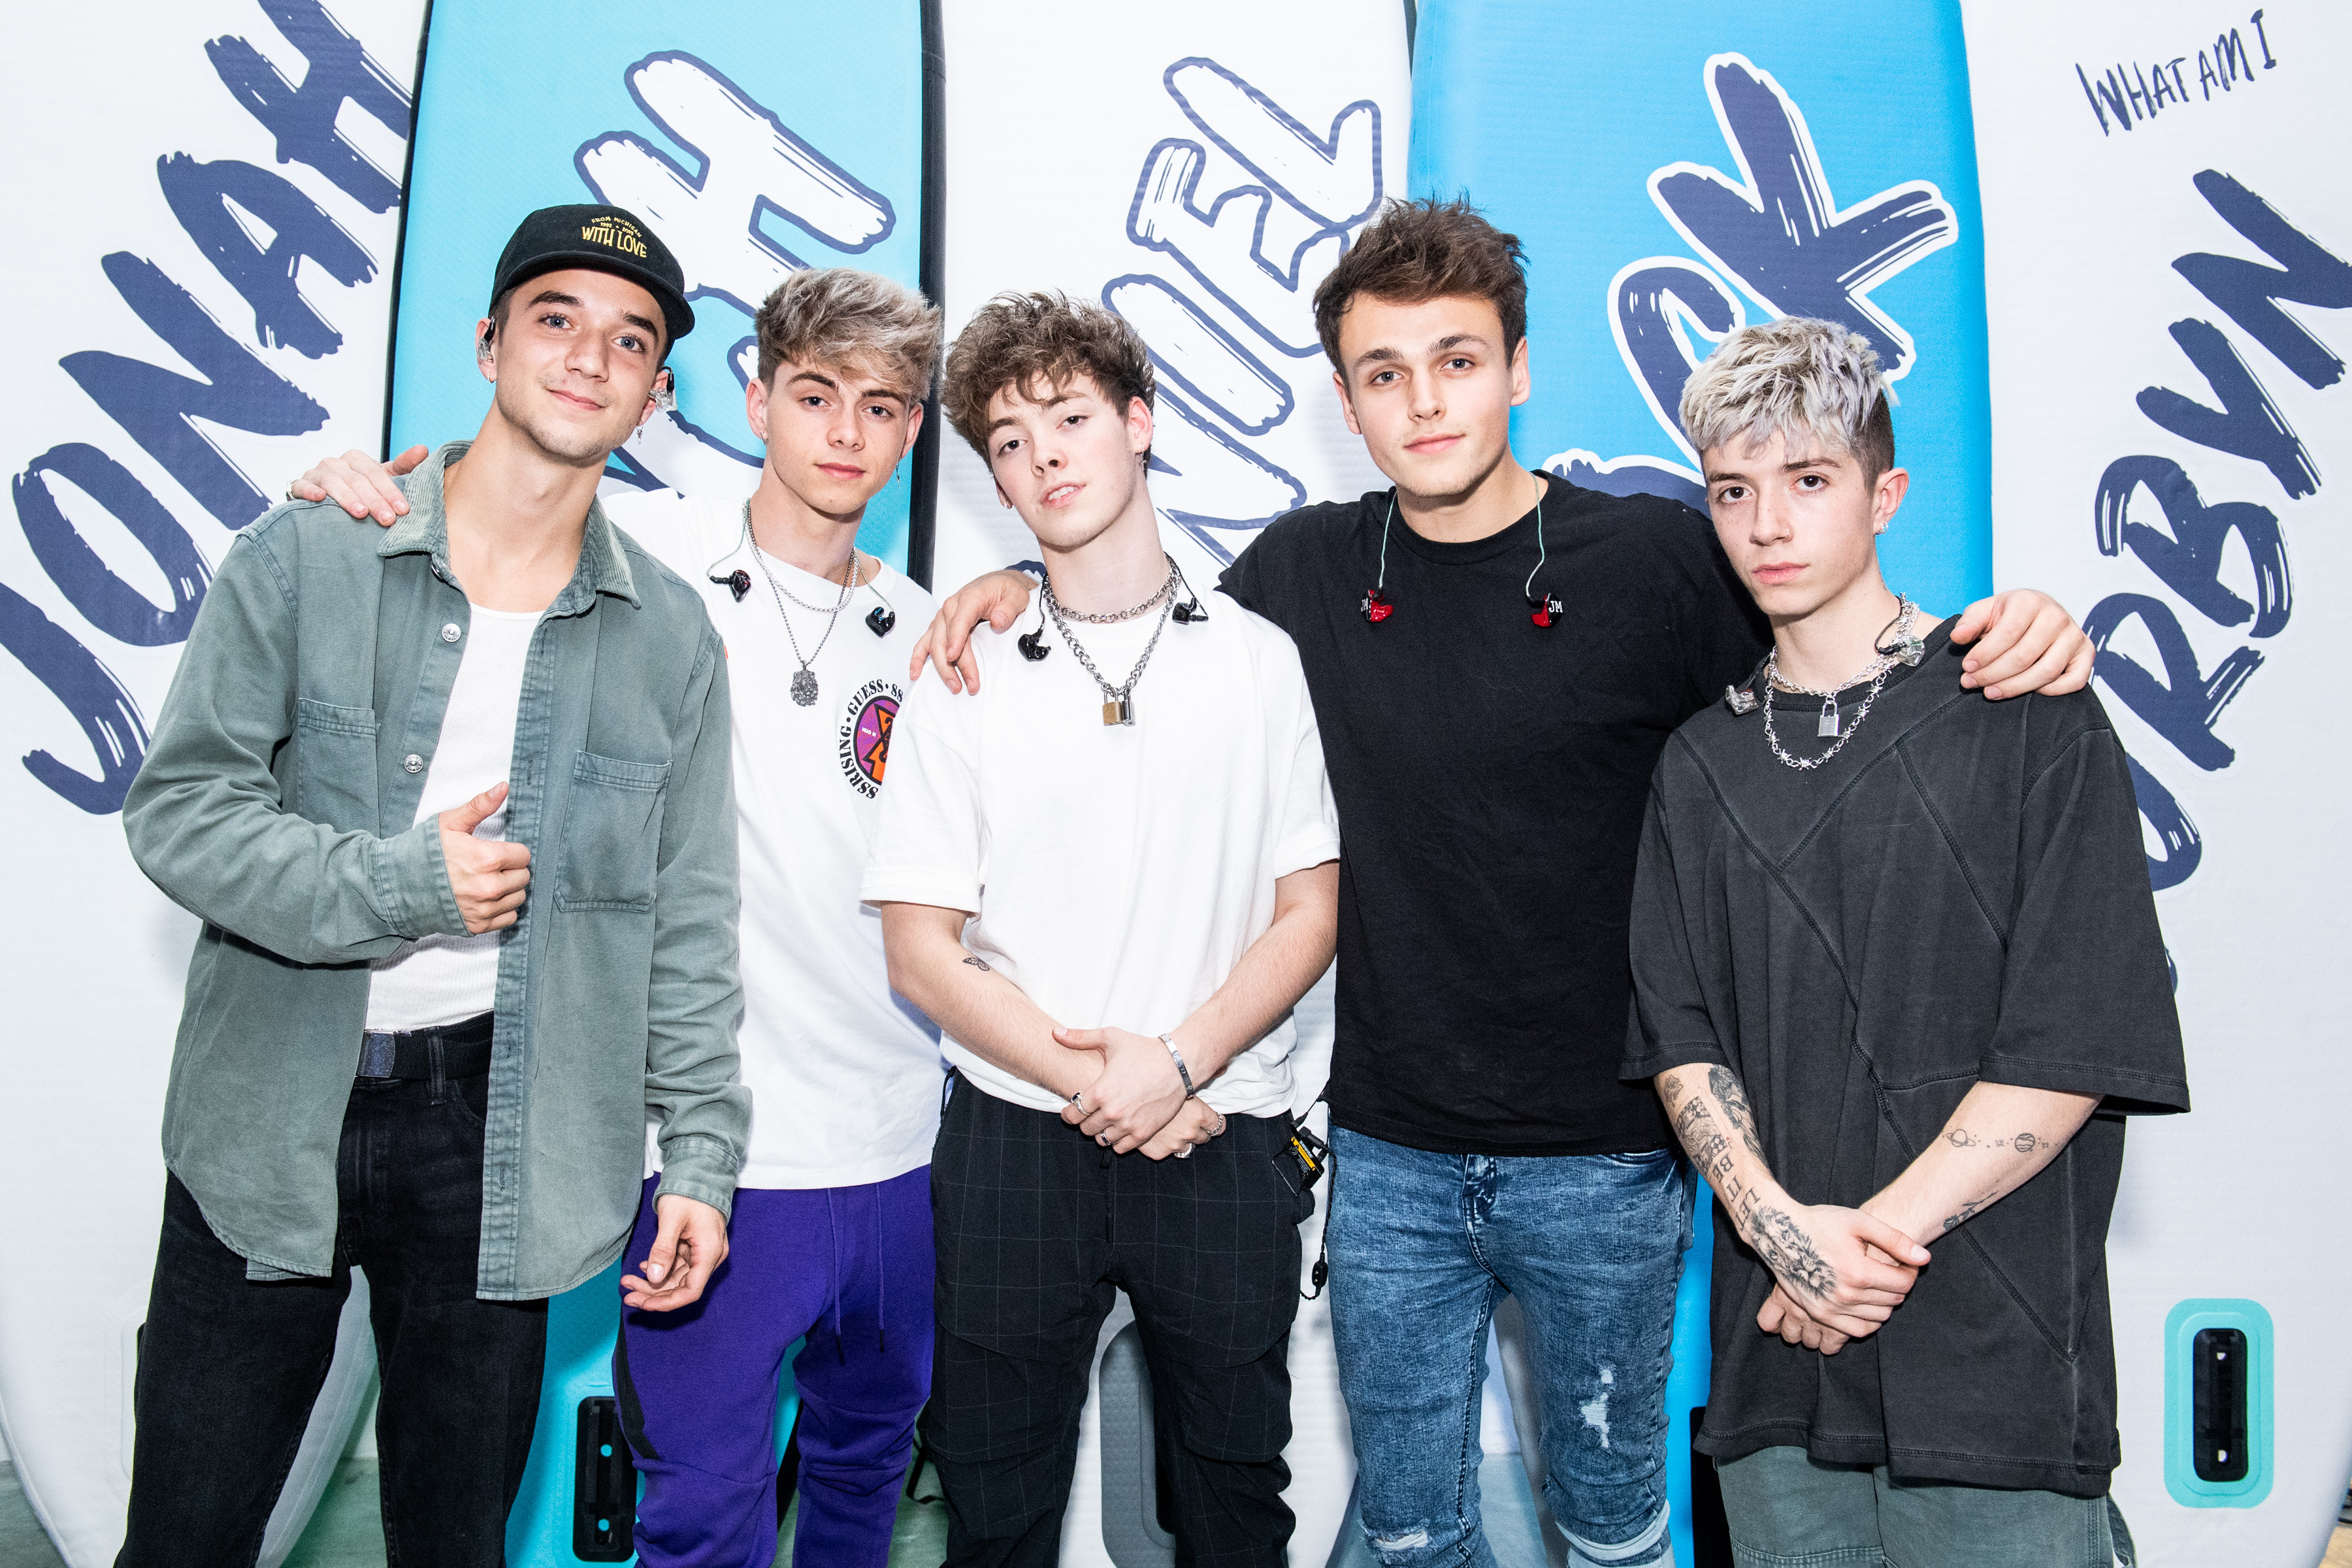 why don't we band